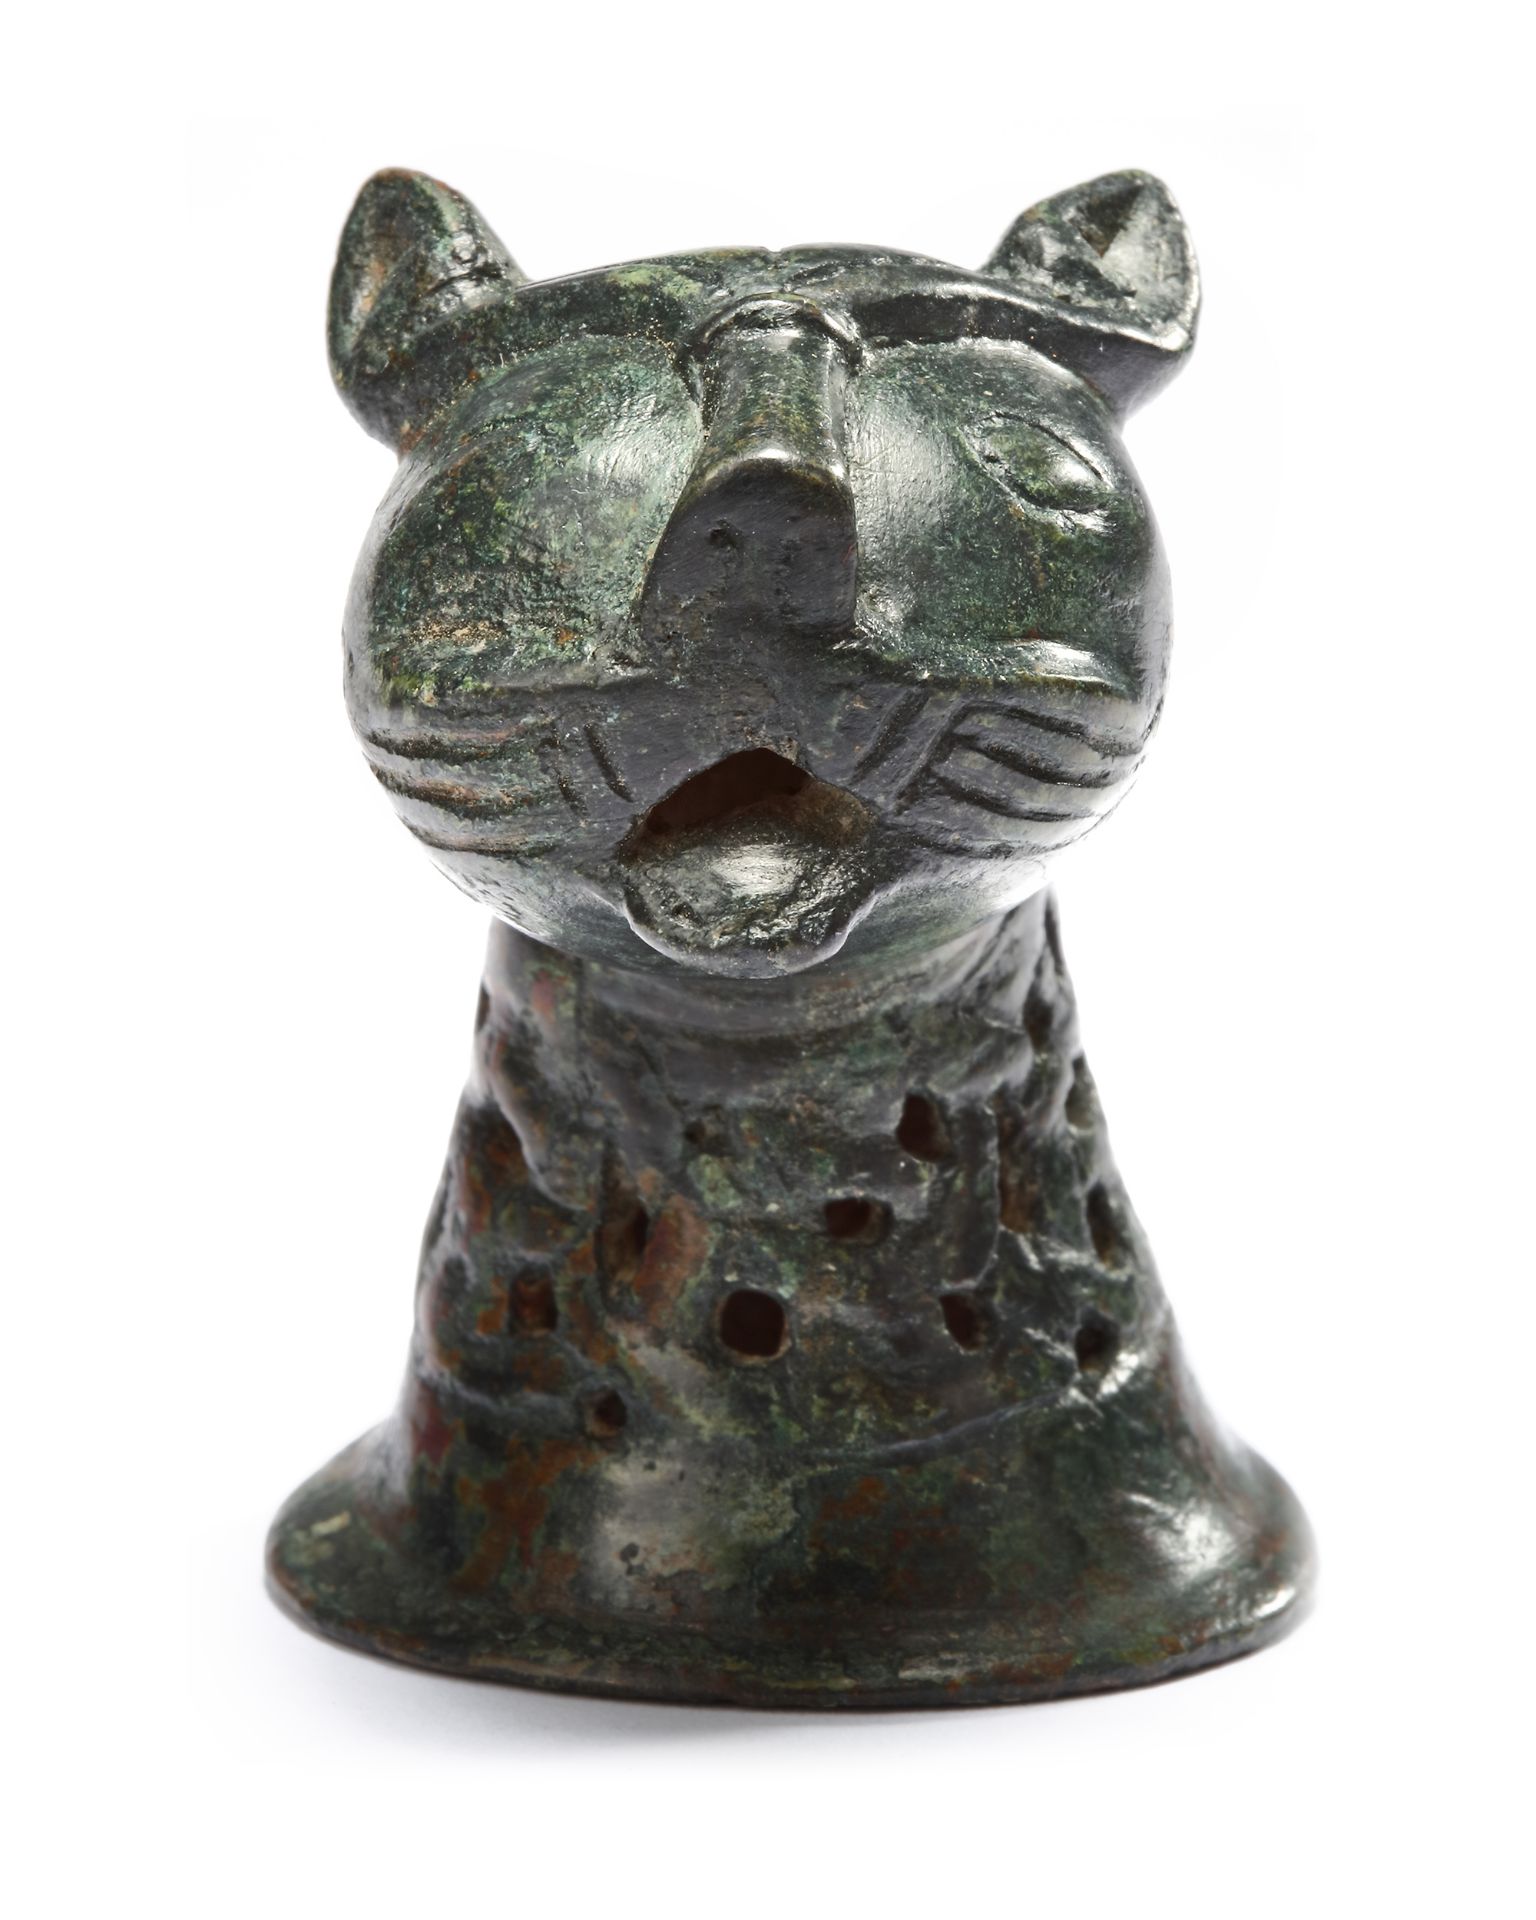 A FINE CAST BRONZE LION HEAD, FROM AN INCENSE BURNER, KHORASAN, 11TH-12TH CENTURY - Image 4 of 8